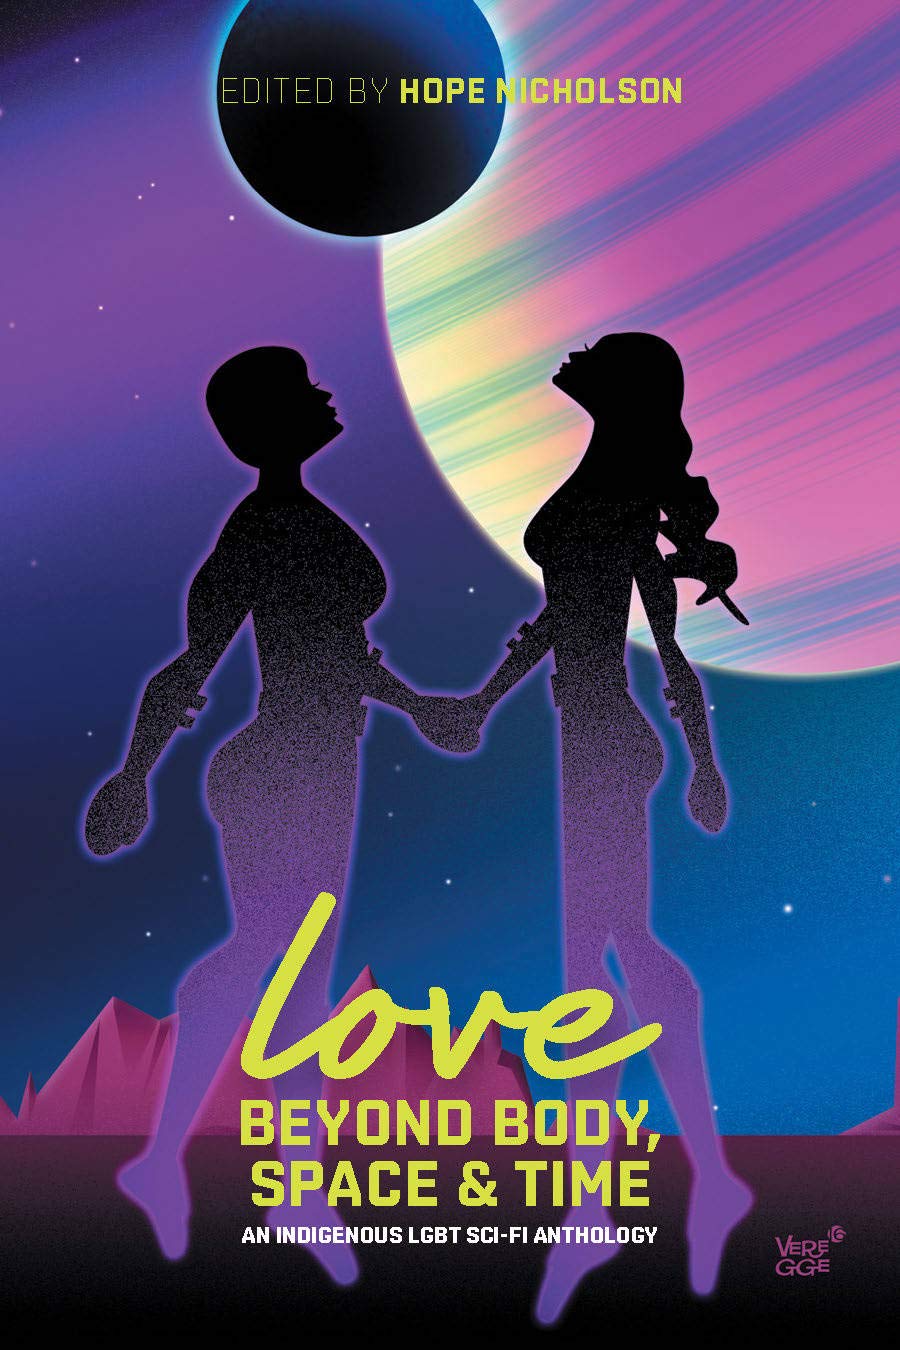 Love Beyond Body, Space and Time: an Indigenous LGBT Sci-fi Anthology (2019, Bedside Press)